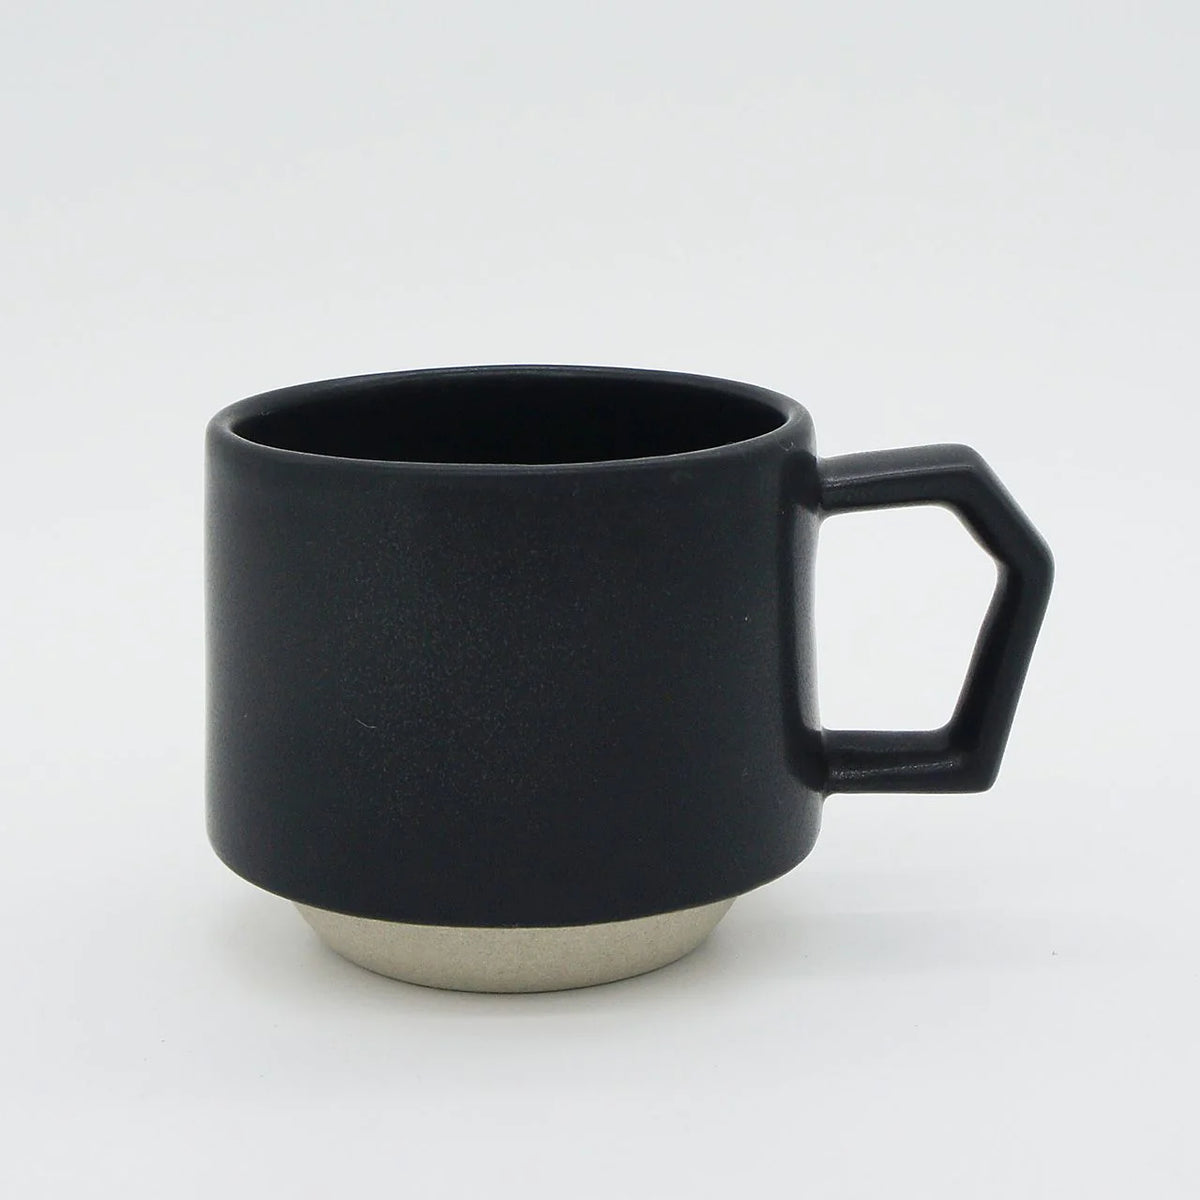 A CHIPS Inc. Stacking Mug - Black with a handle.